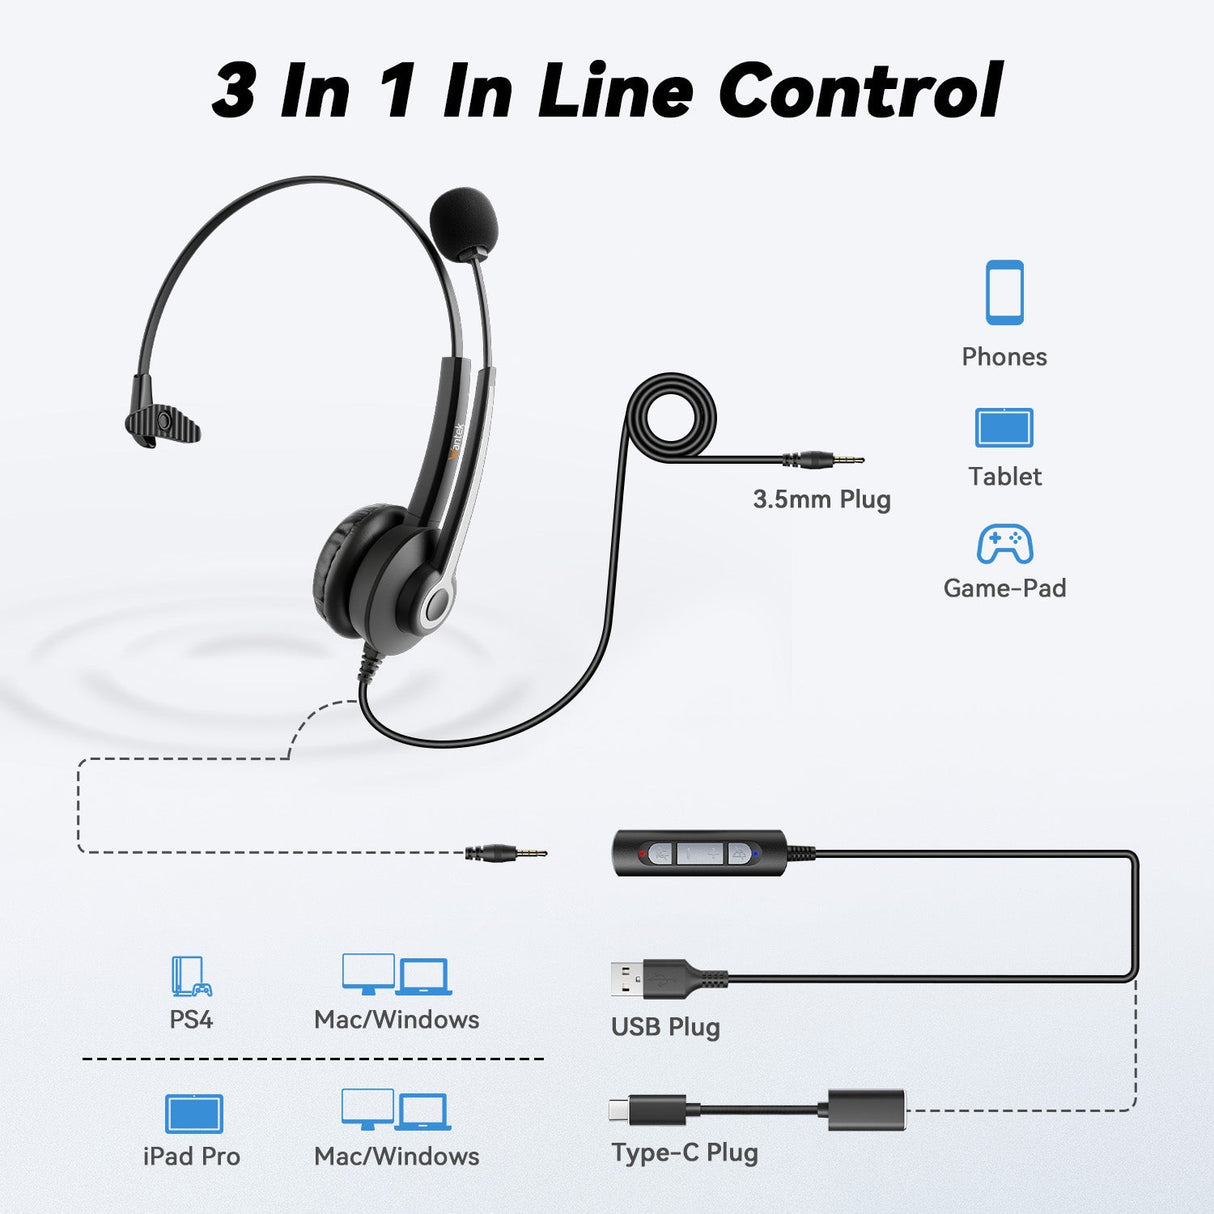 Wantek® h681 mono 3-in-1 USB headset for phones